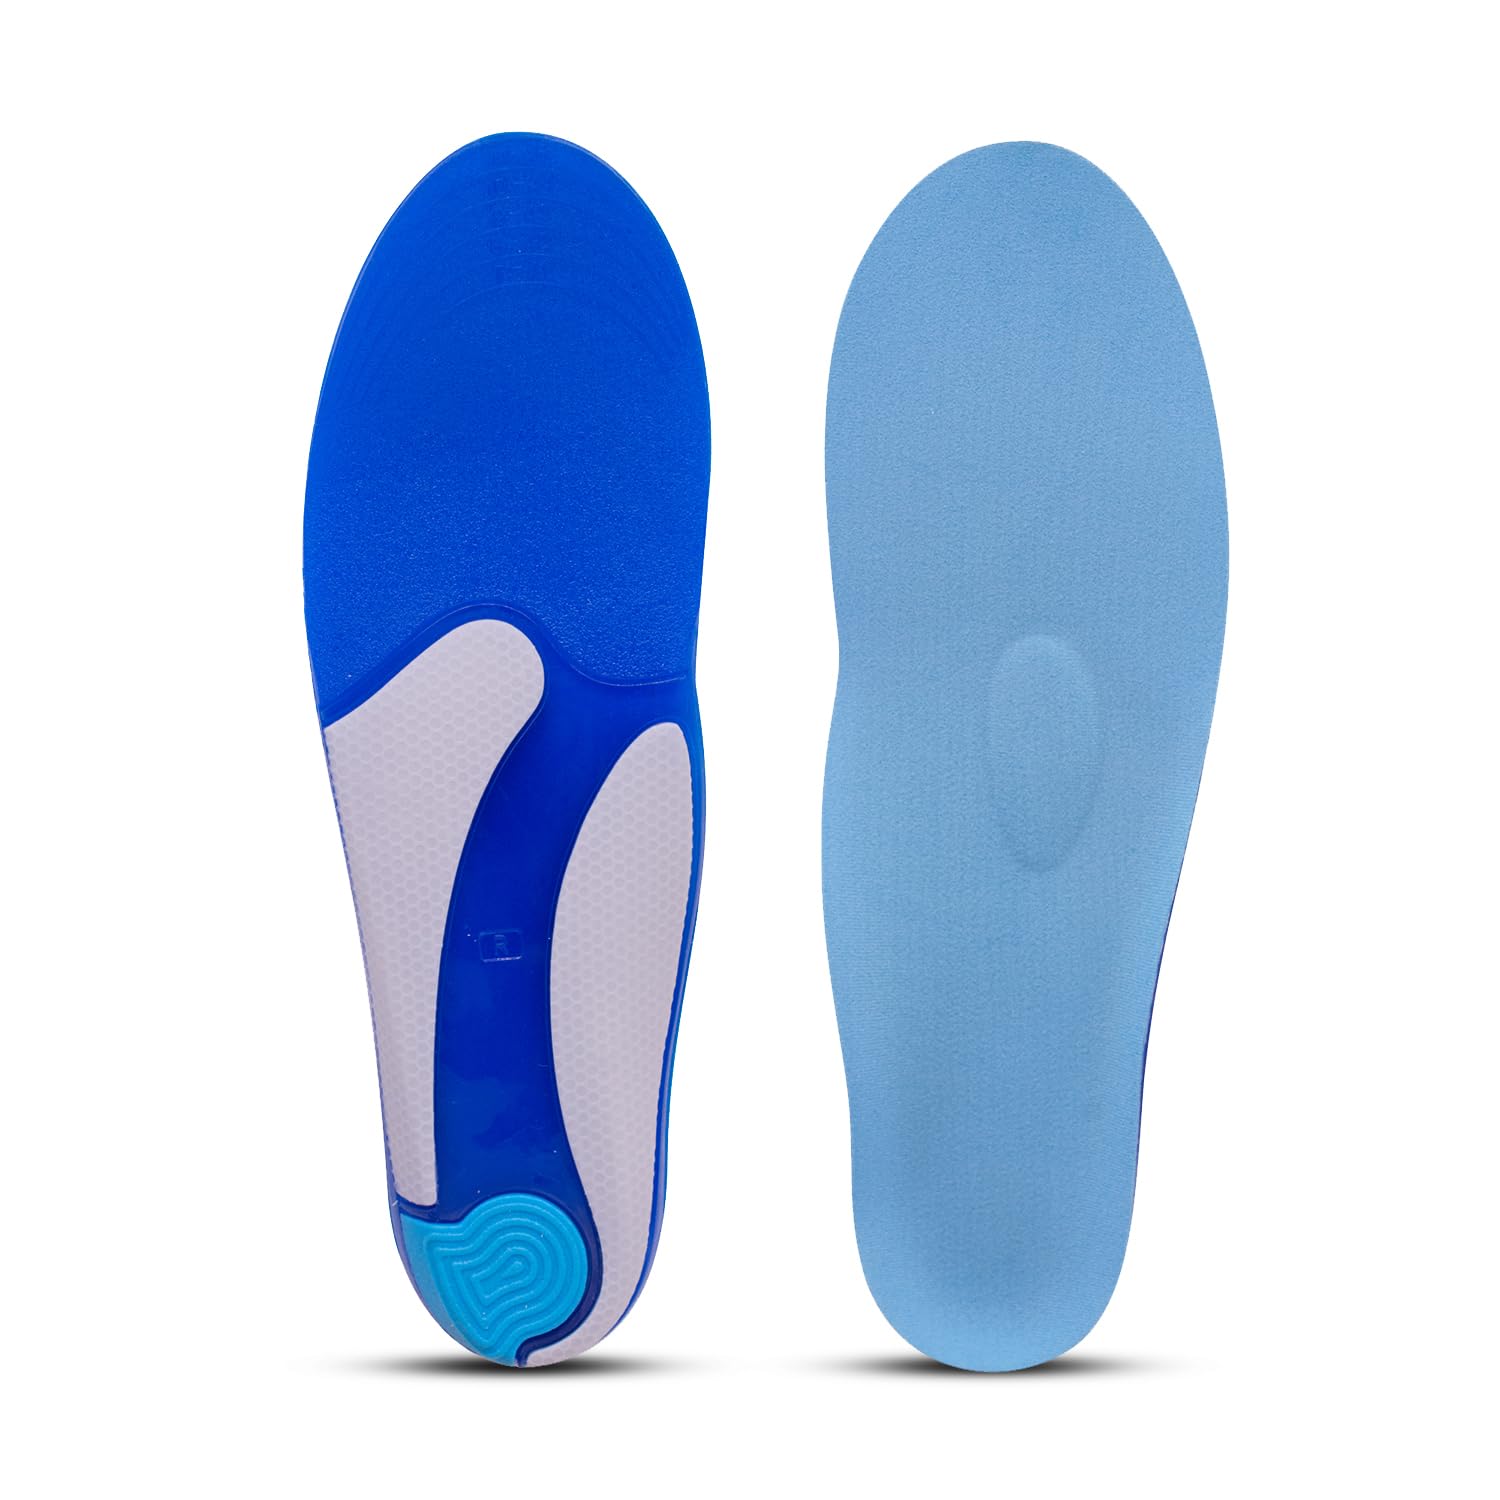 Dr Foot Women's Insole | Extra Support Orthotics For Walking Running & Regular Use | Enhance Comfort and Stability for Active Feet | All Day Ultra Comfort & Support | For Women - 1 Pair (Large Size)